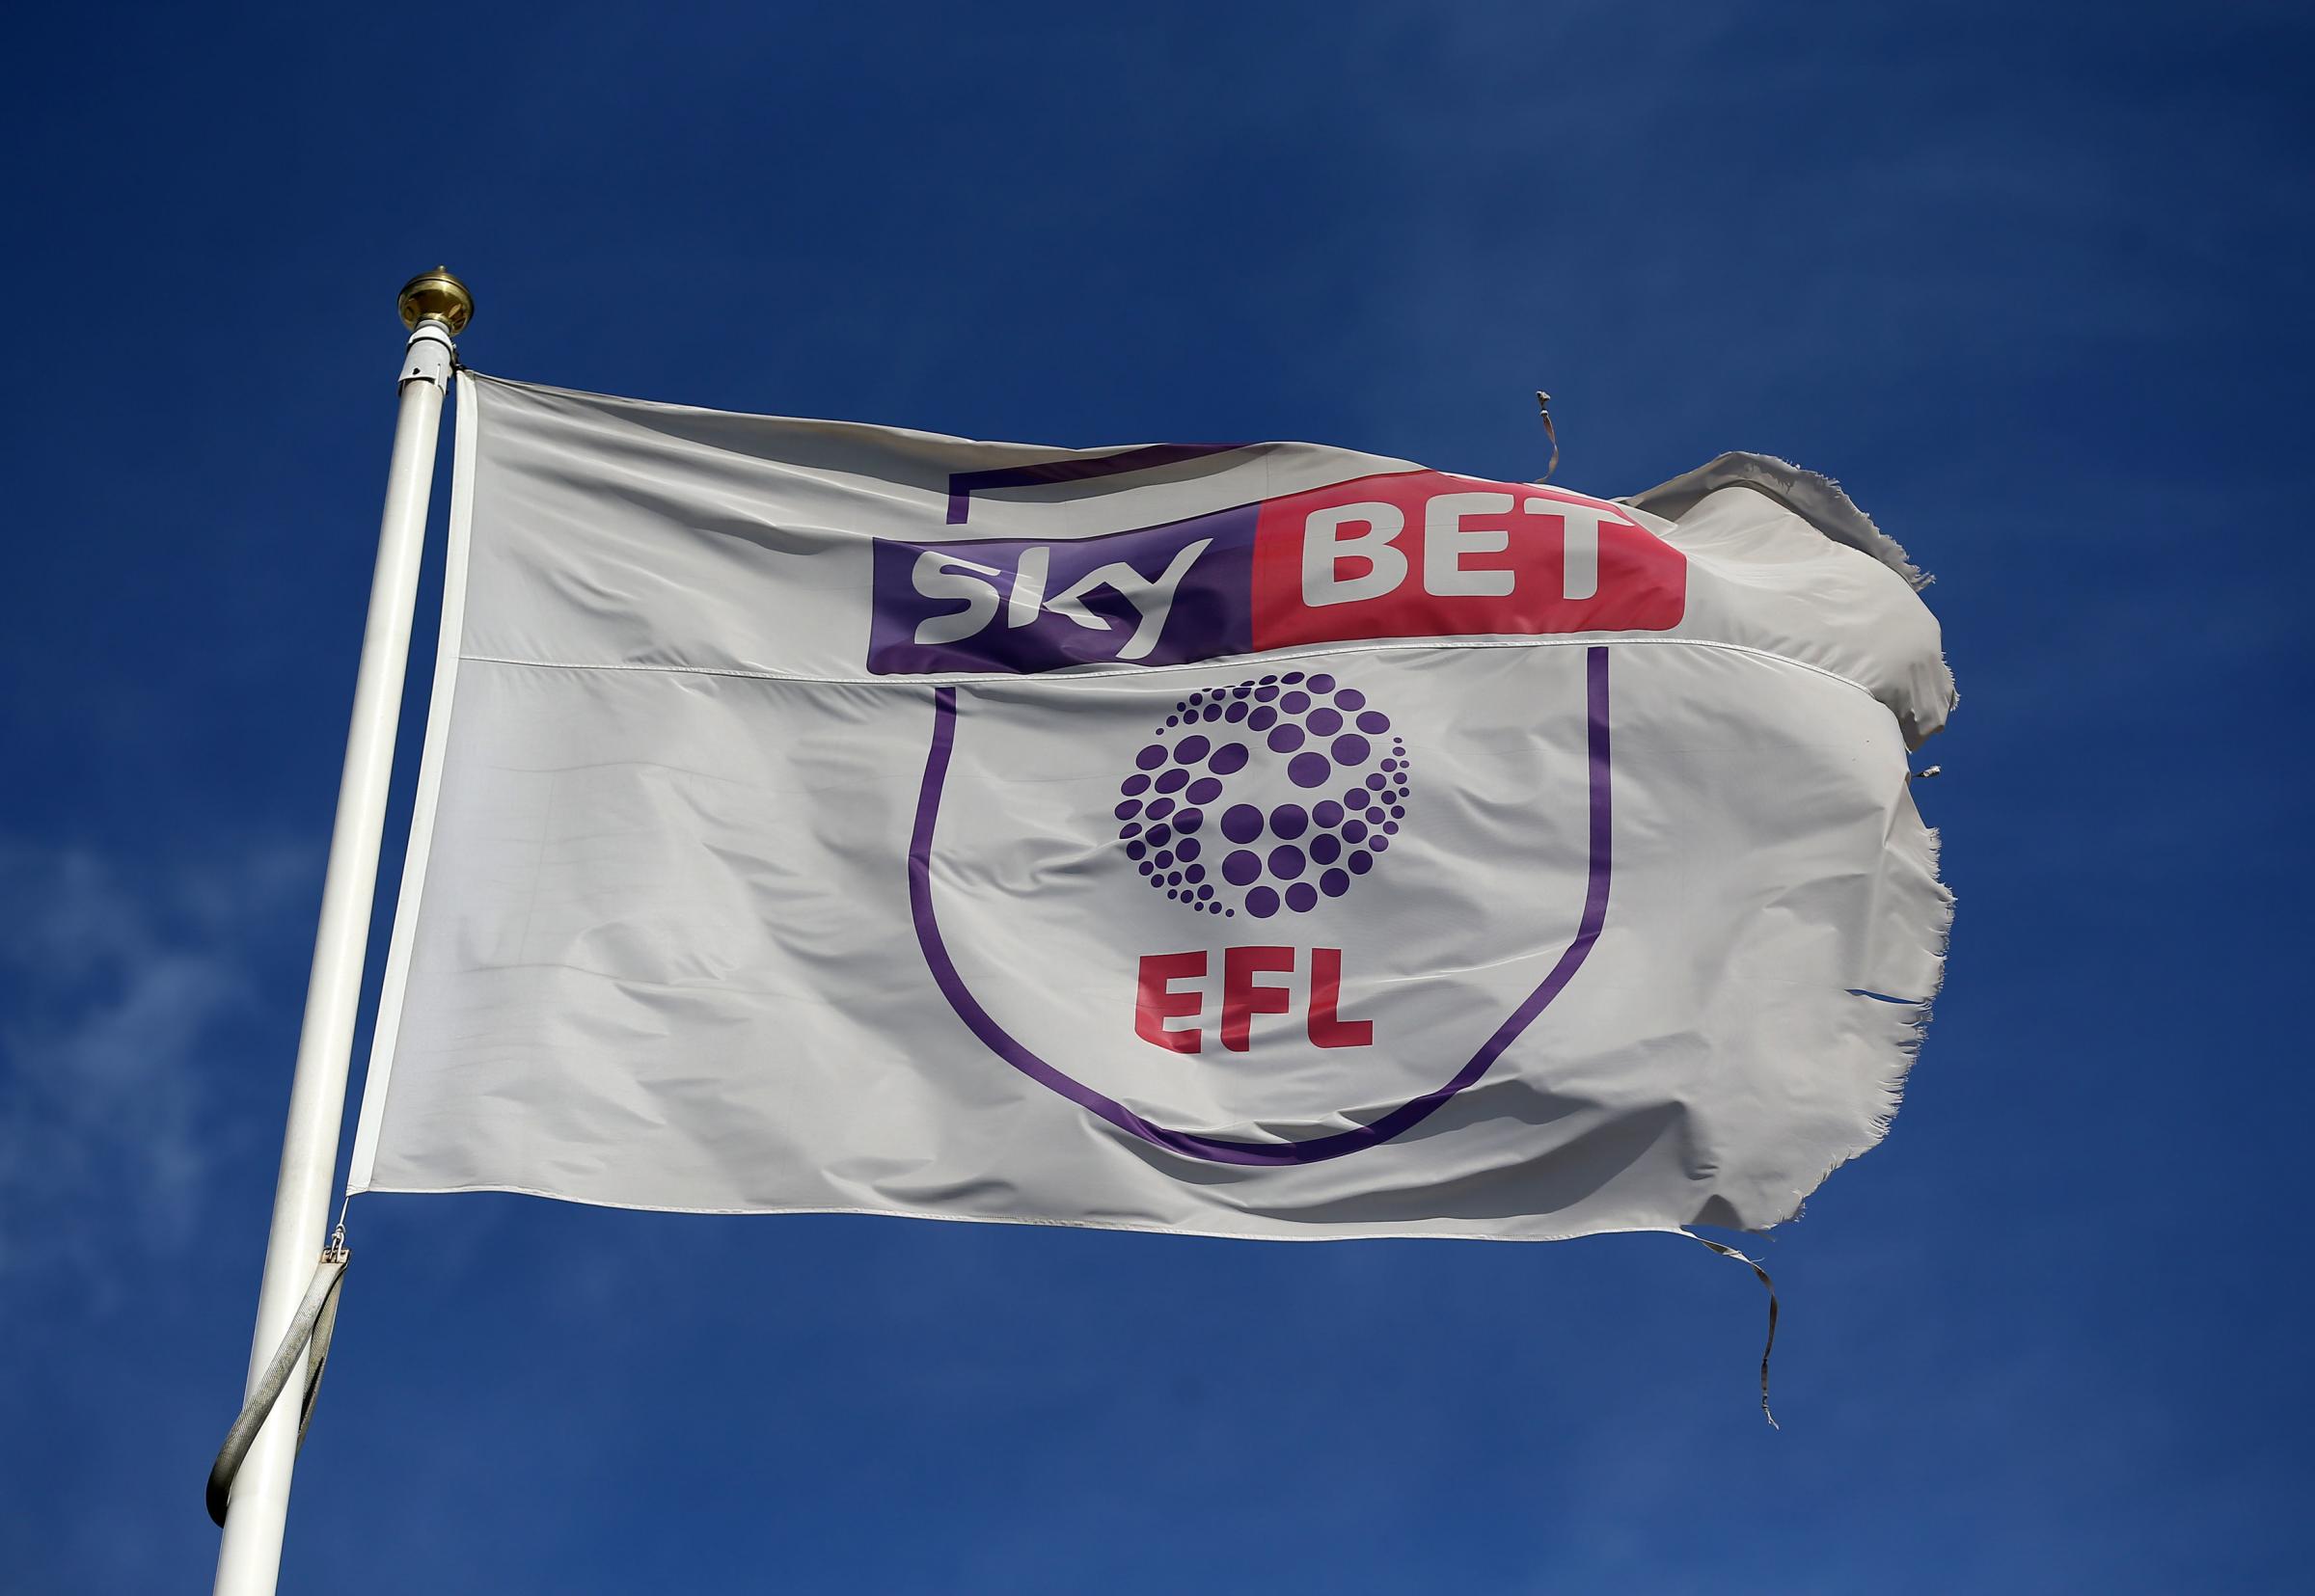 Premier League and EFL agree rescue package